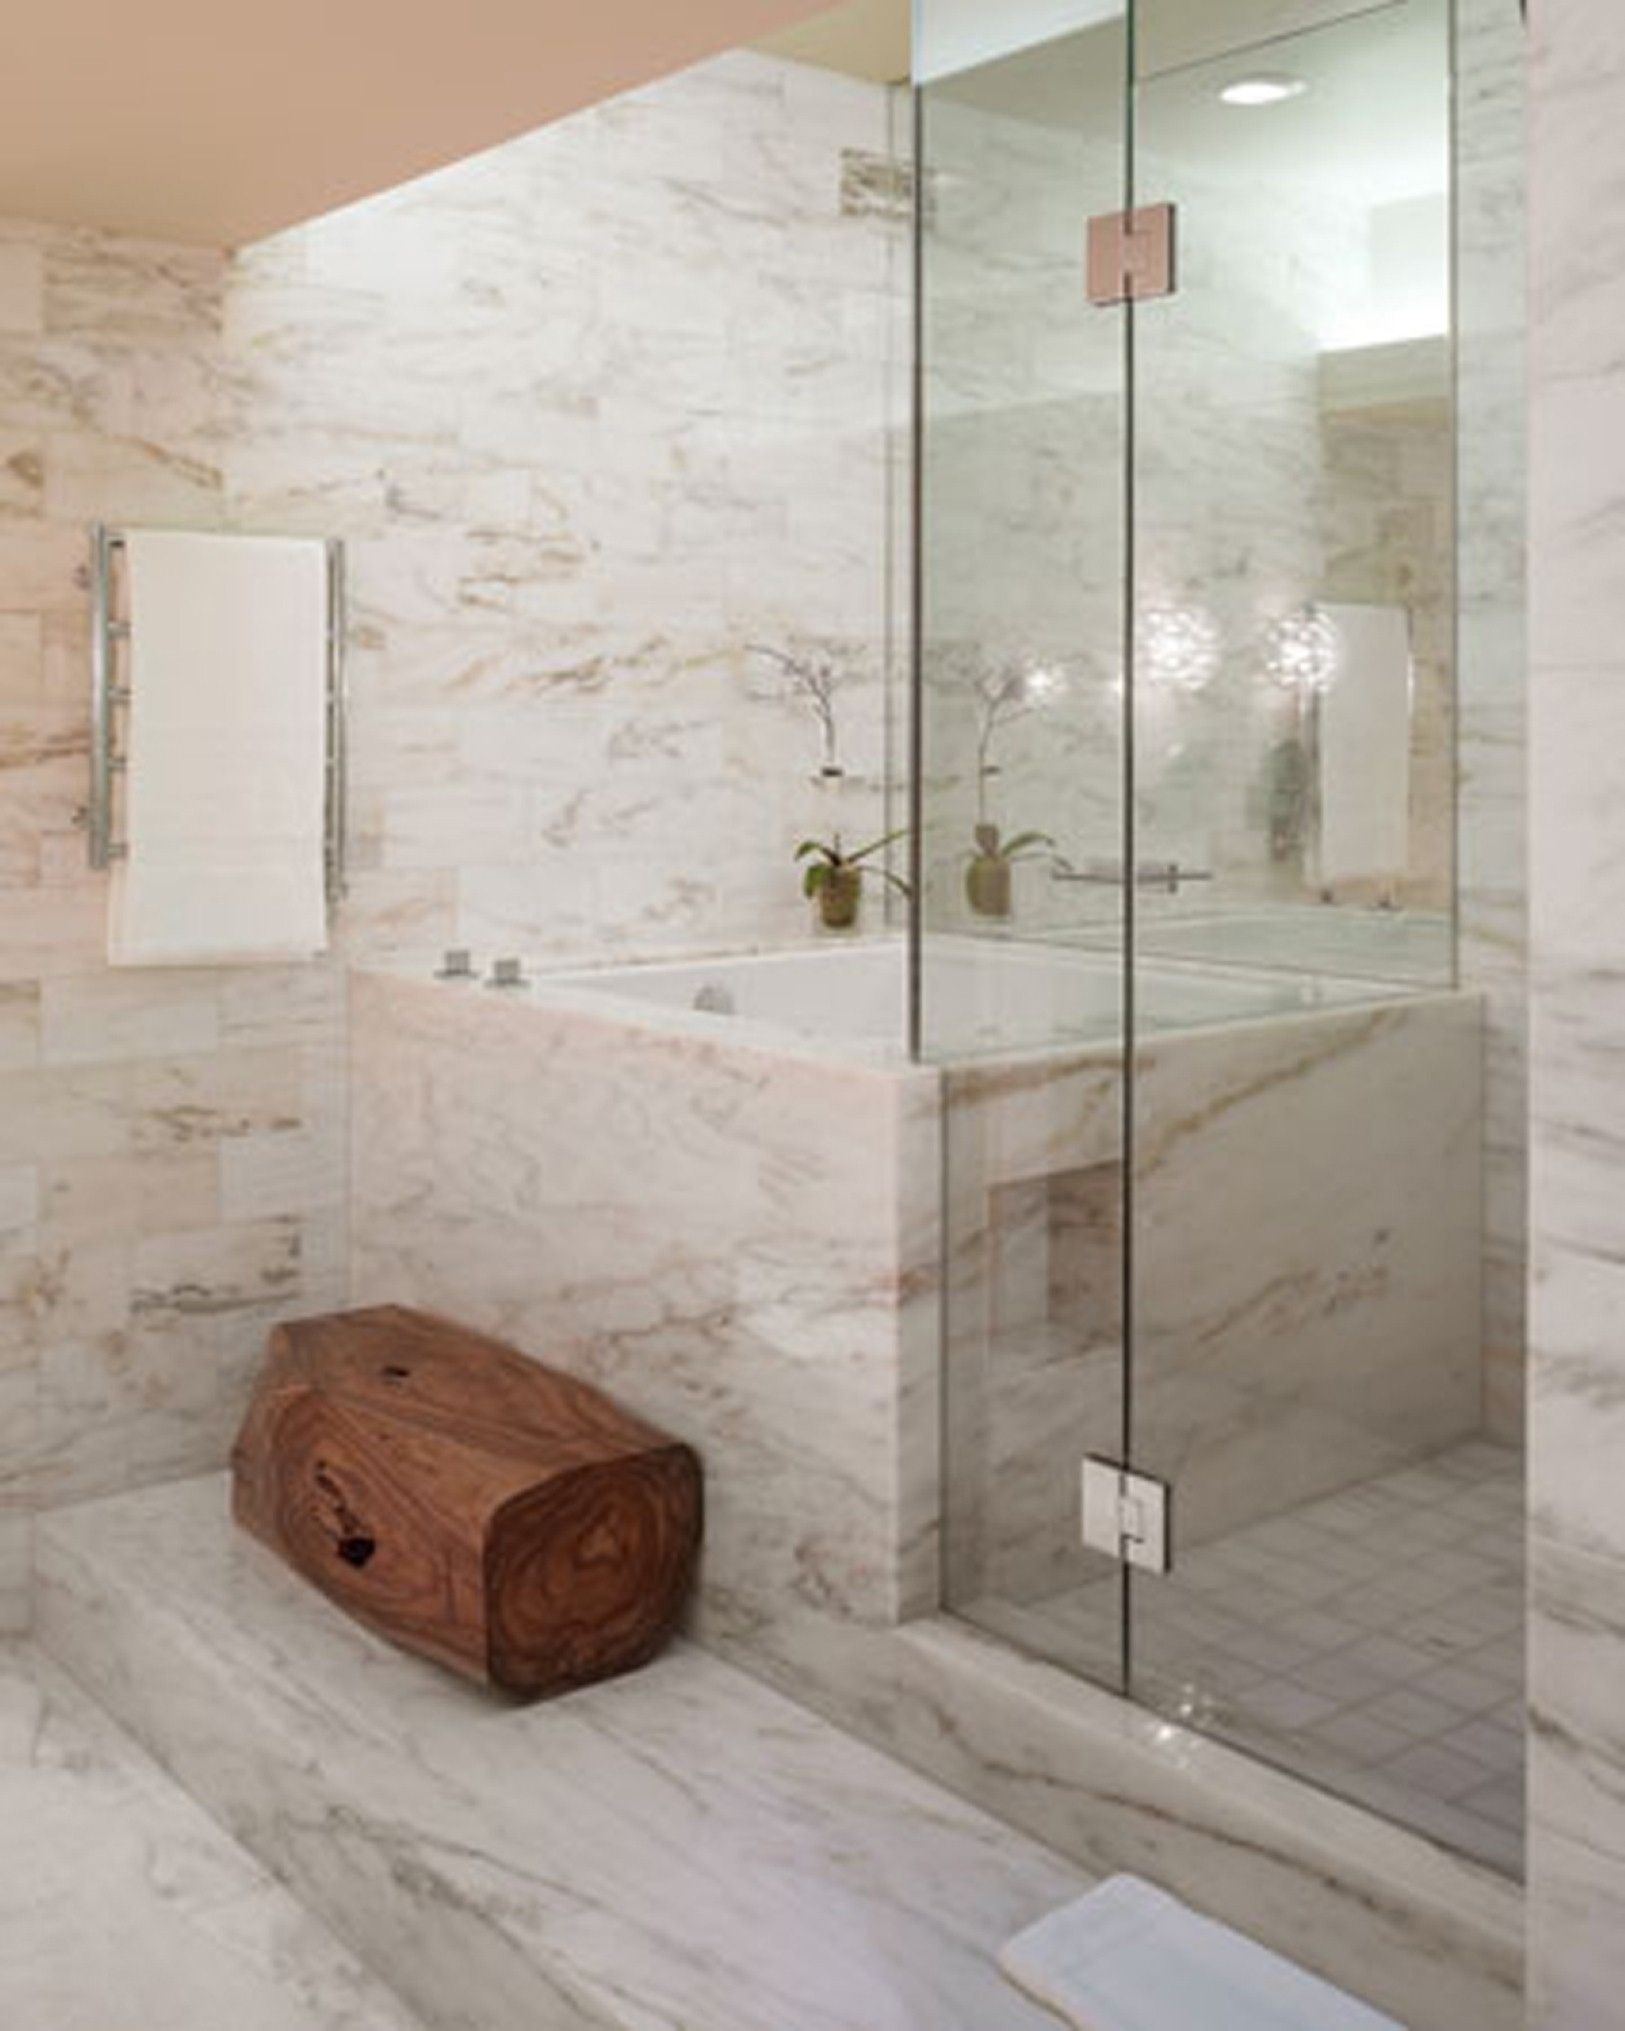 Spectacular Bathroom Tile Designs And To The Inspiration Bathroom Your Homes (View 16 of 29)